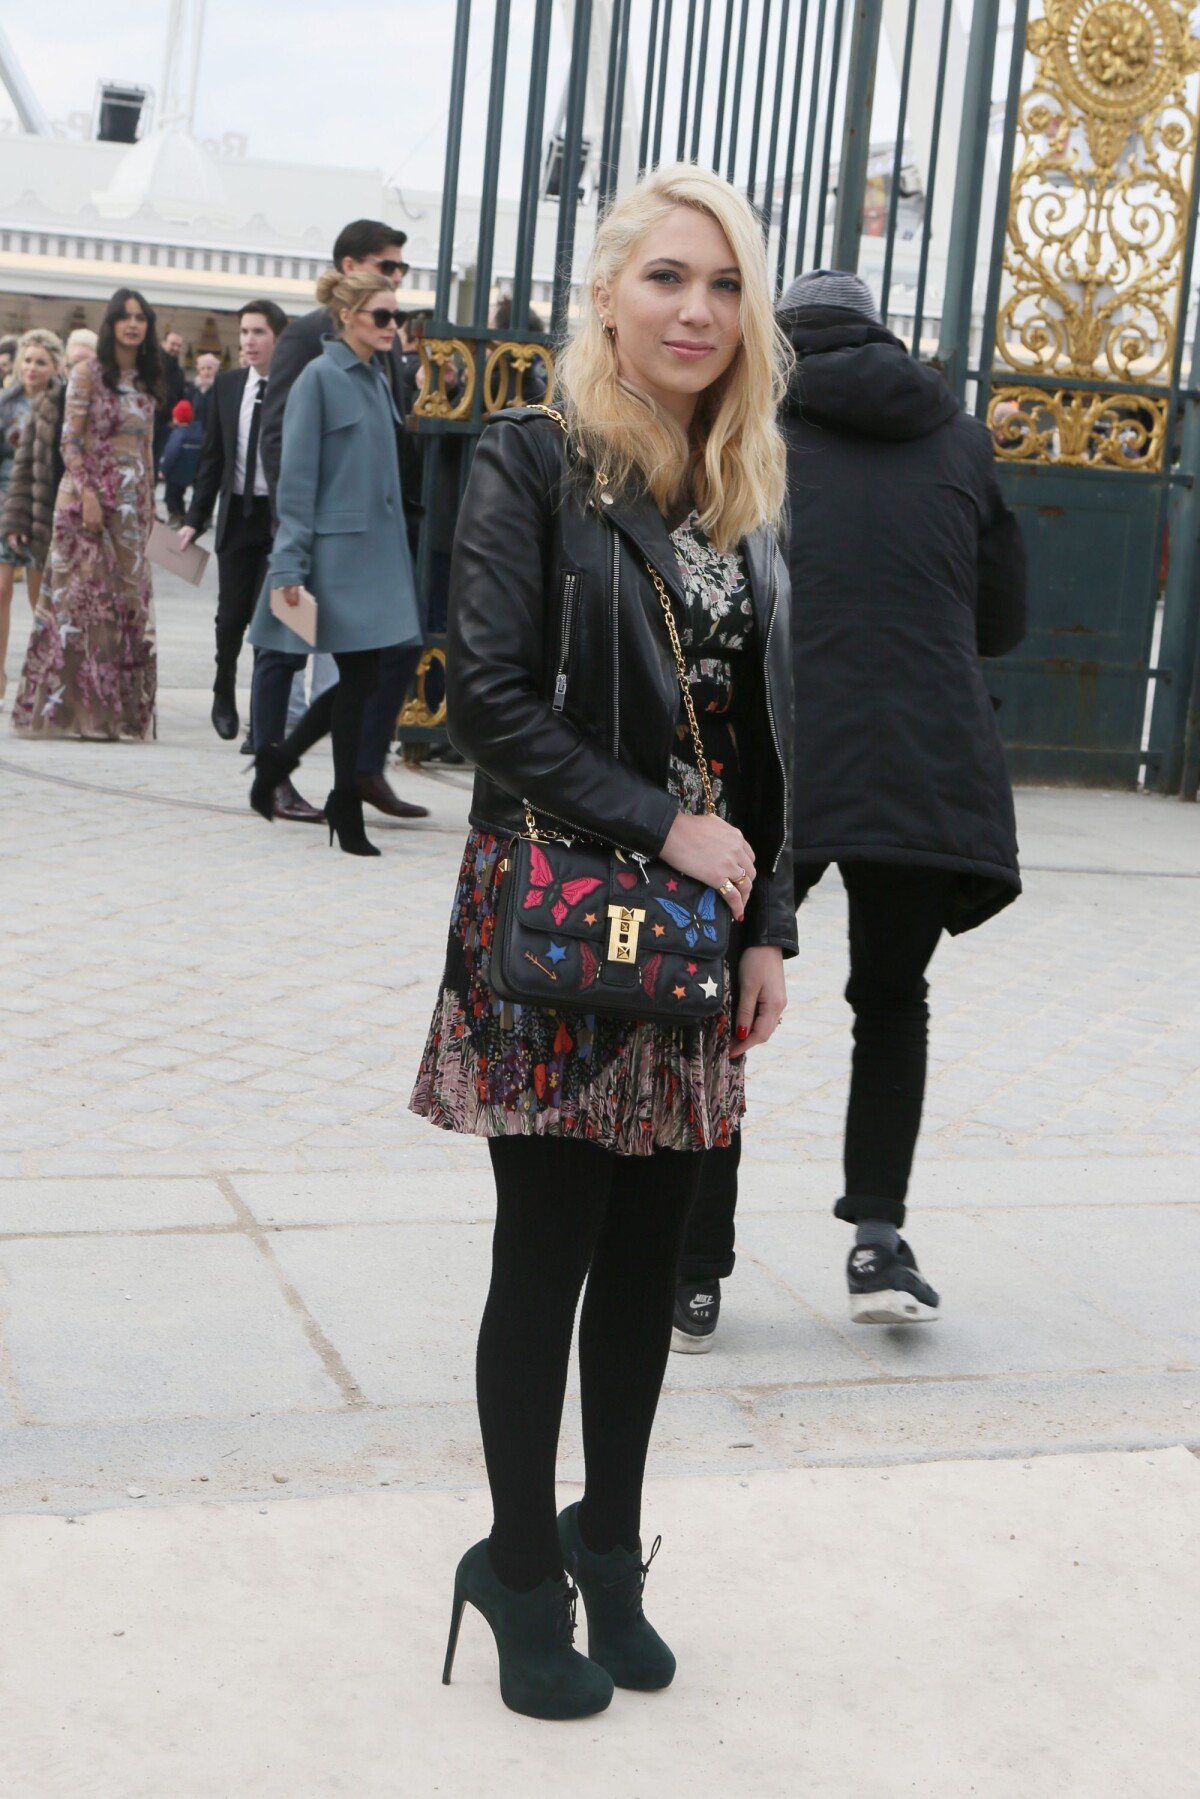 Camille Seydoux attending the Valentino show at the Tuileries as